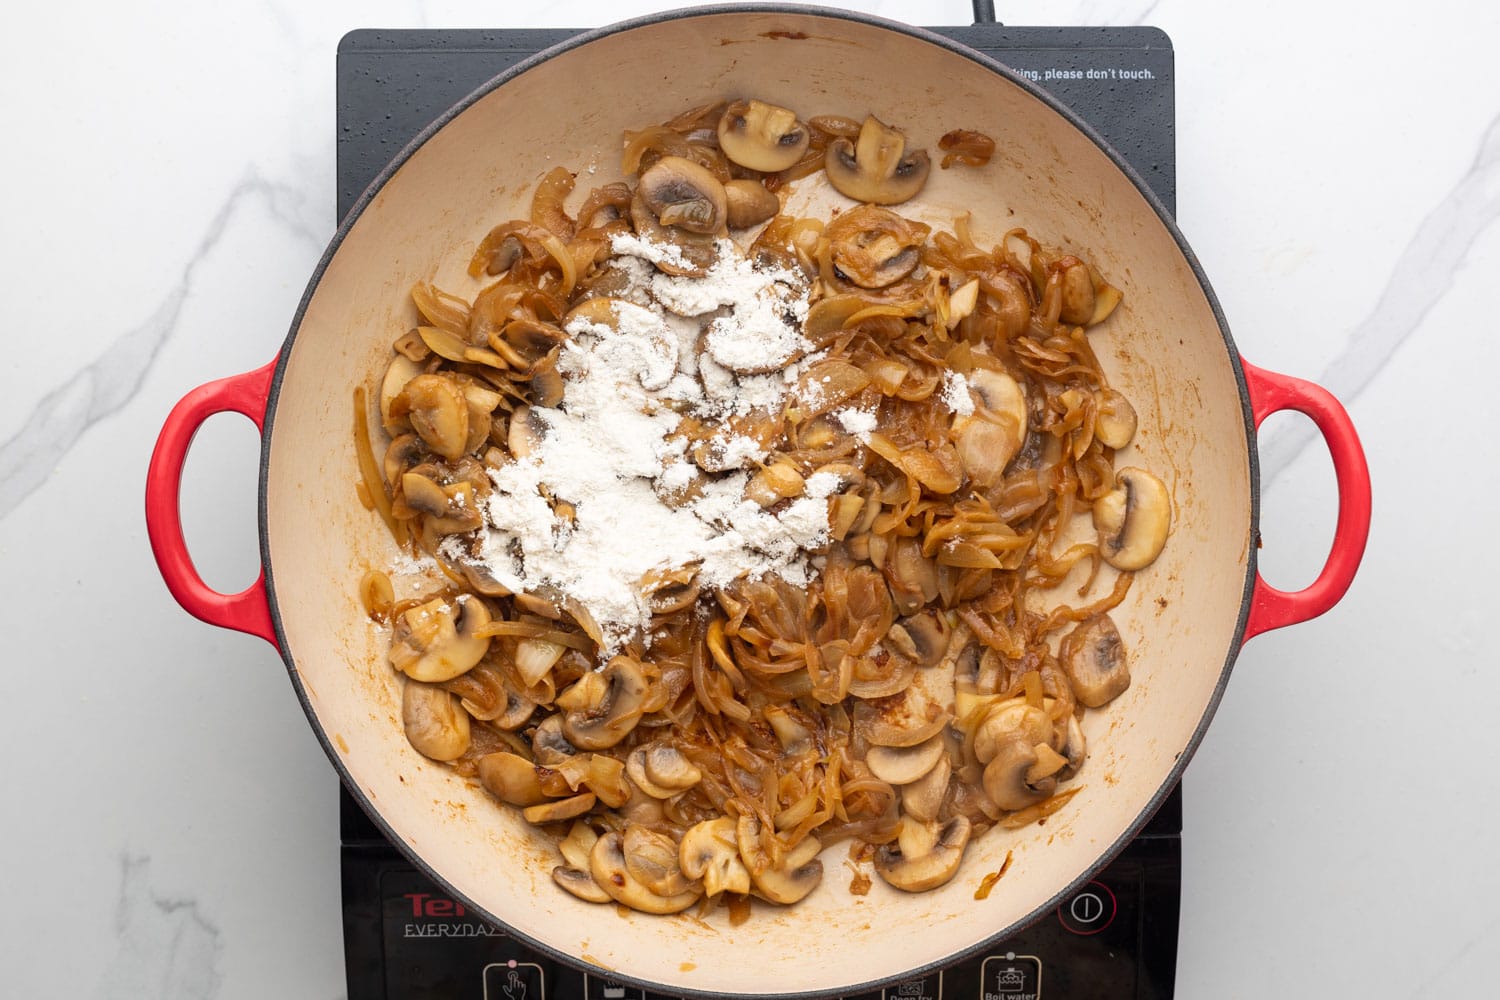 Flour added to caramelized onions and mushrooms in a pan.